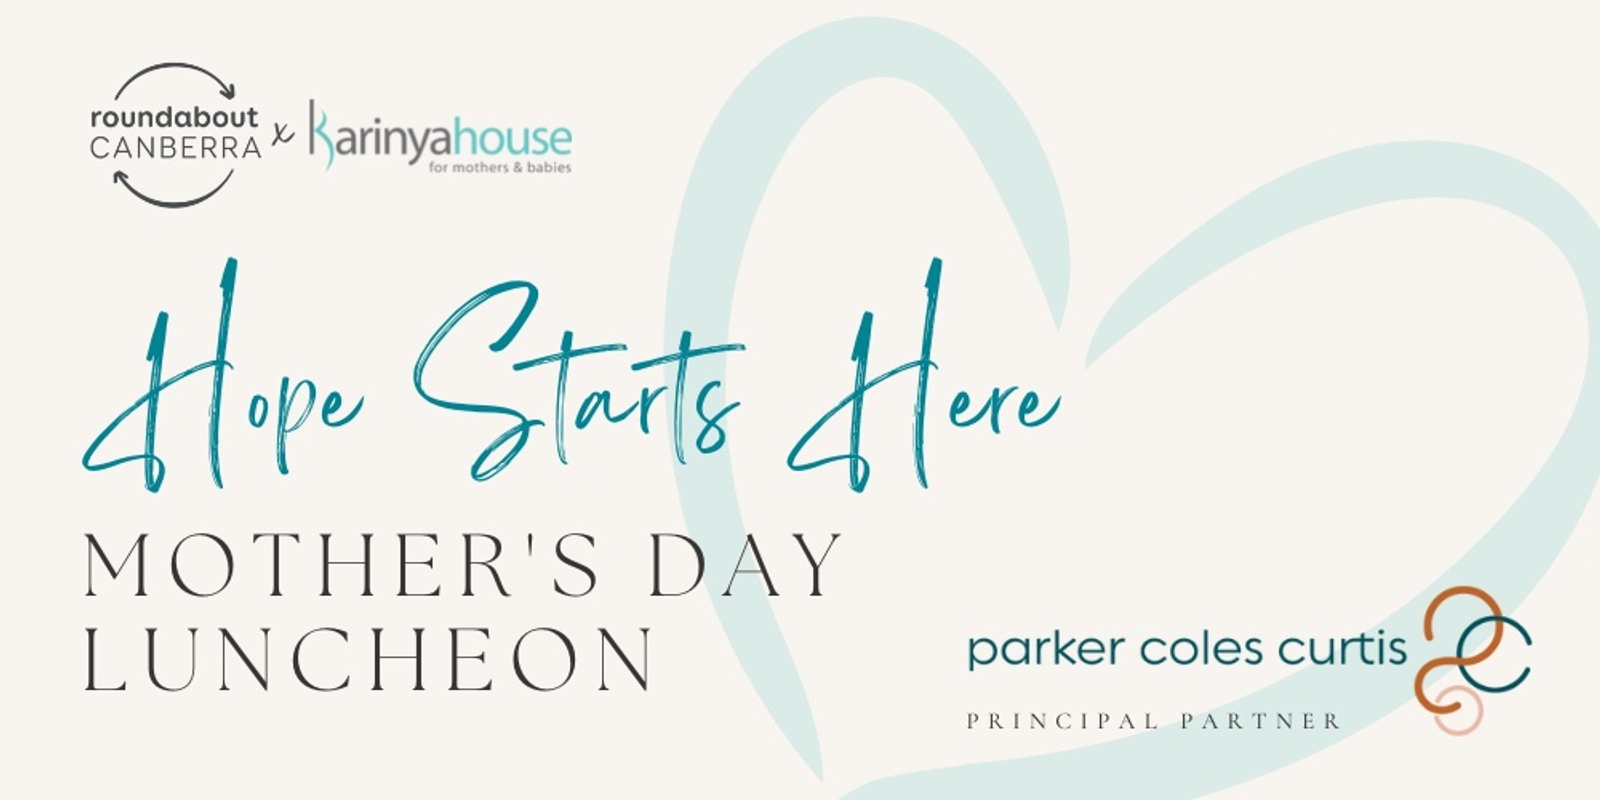 Banner image for Hope Starts Here Mother's Day Luncheon for Roundabout Canberra and Karinya House 